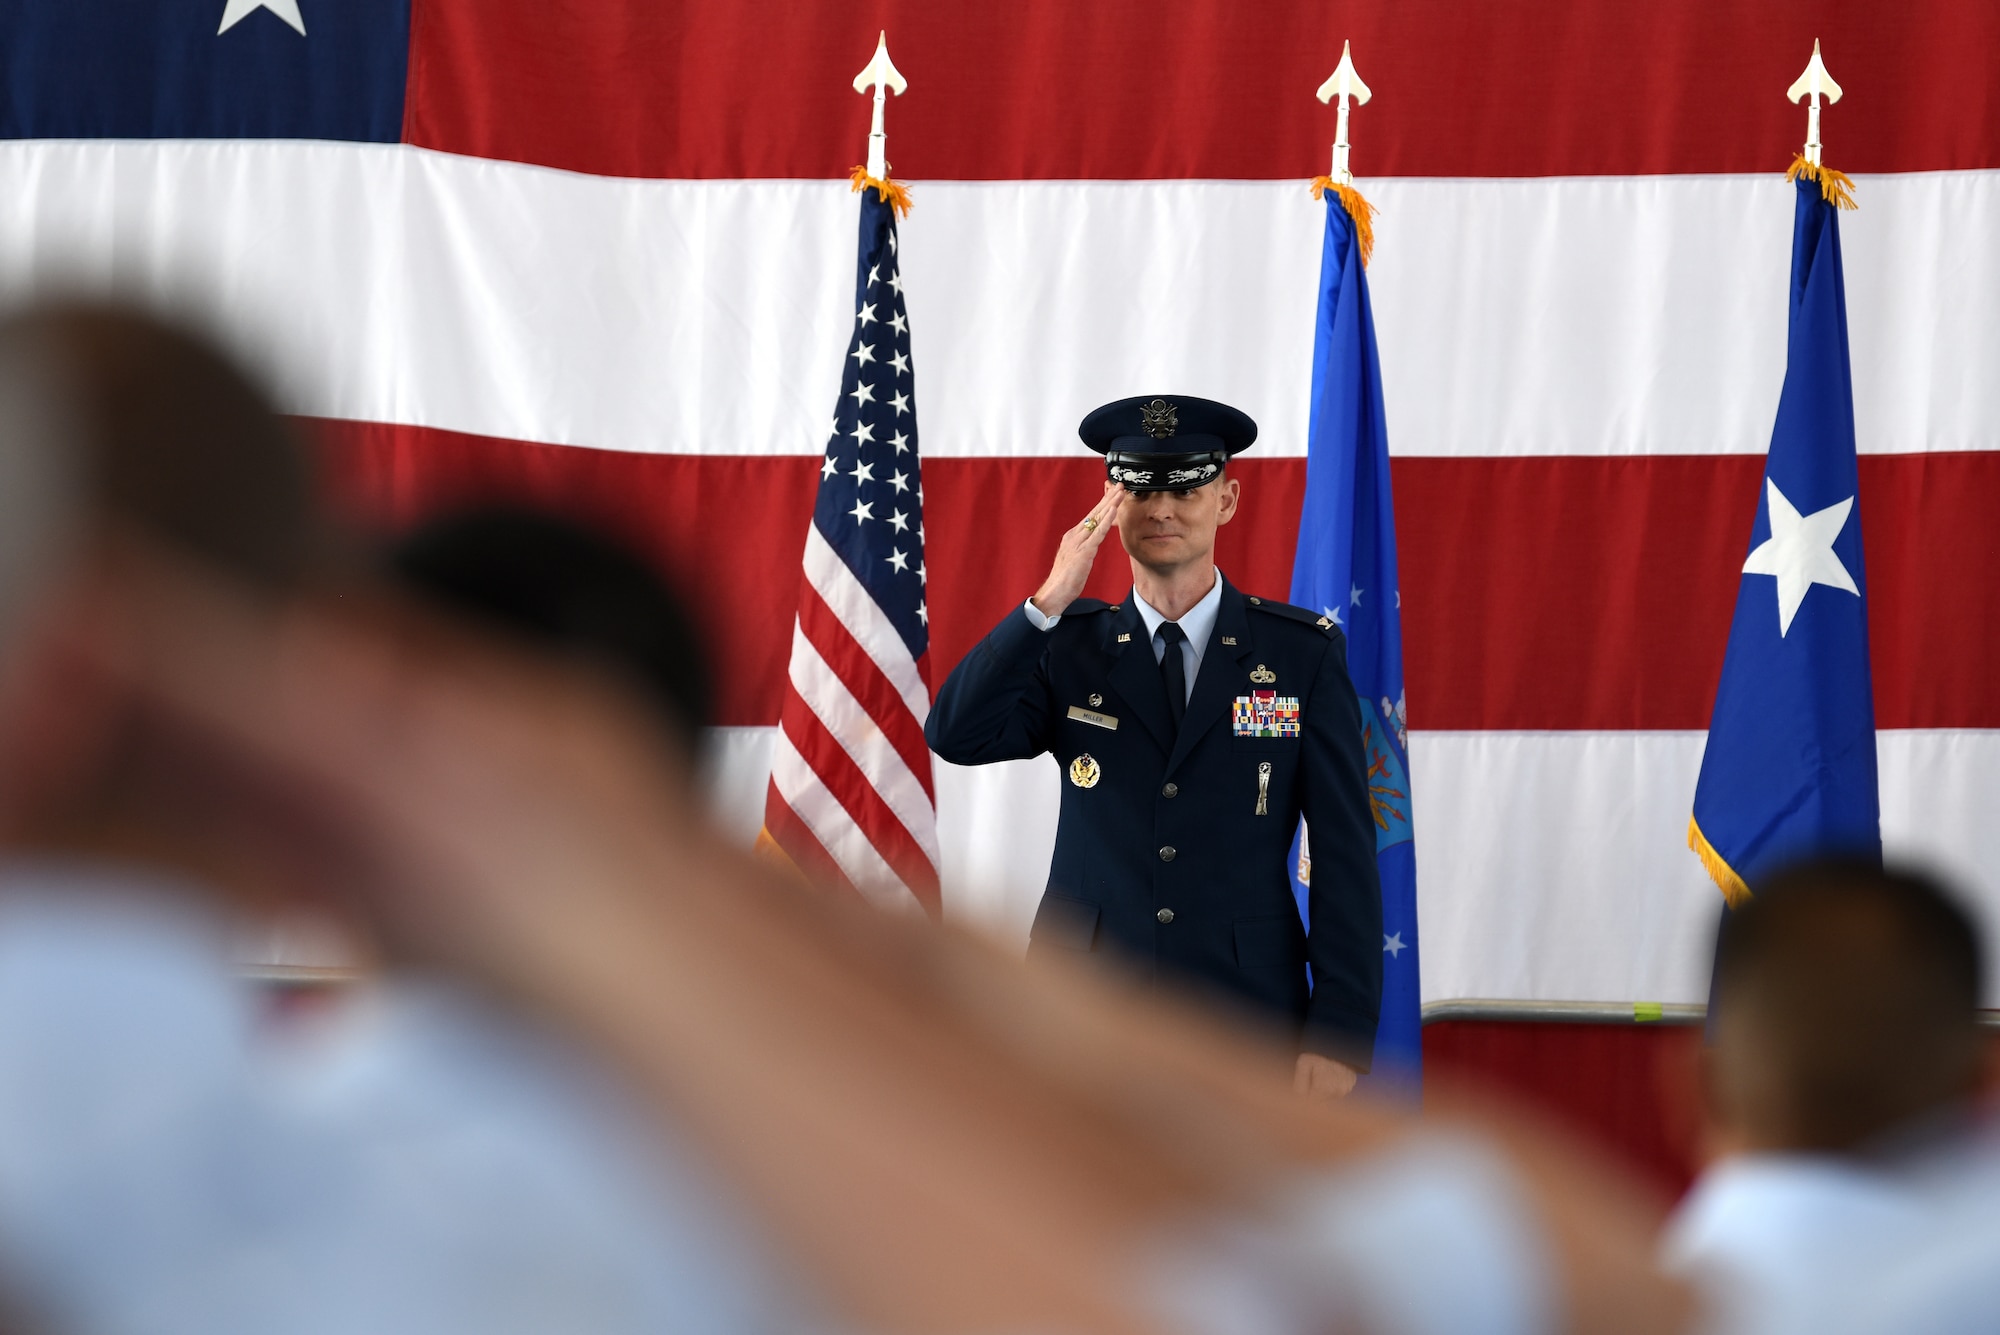 Col. David Miller, the new 377th Air Base Wing commander, receives his first salute from the Airmen of the 377th ABW during the change of command ceremony at Kirtland Air Force Base, N.M., June 21, 2019. Miller comes to Kirtland from Malmstrom AFB, Mont., where he was commander of the 341st Maintenance Group. (U.S. Air Force photo by Senior Airman Eli Chevalier)